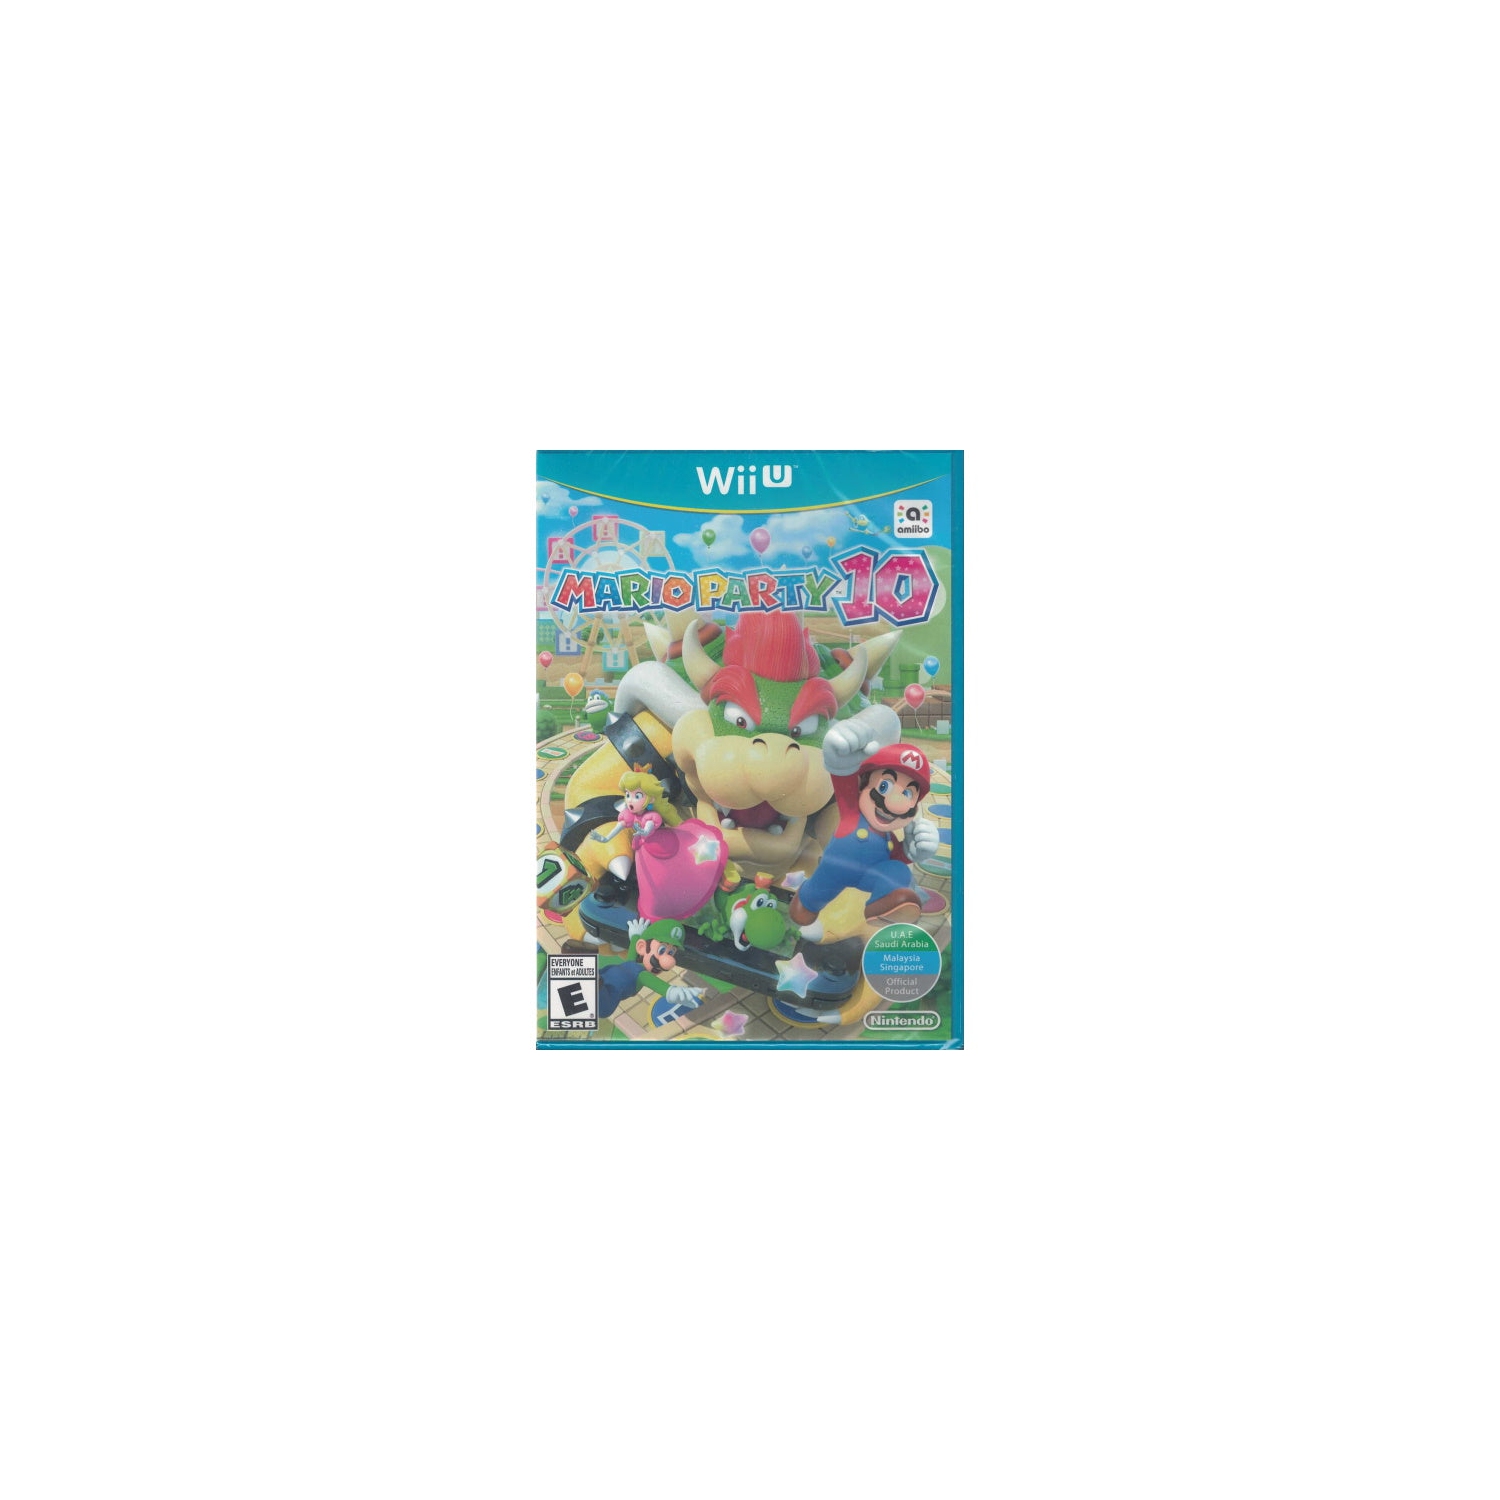 MARIO PARTY 10 - WII U (GAME ONLY)